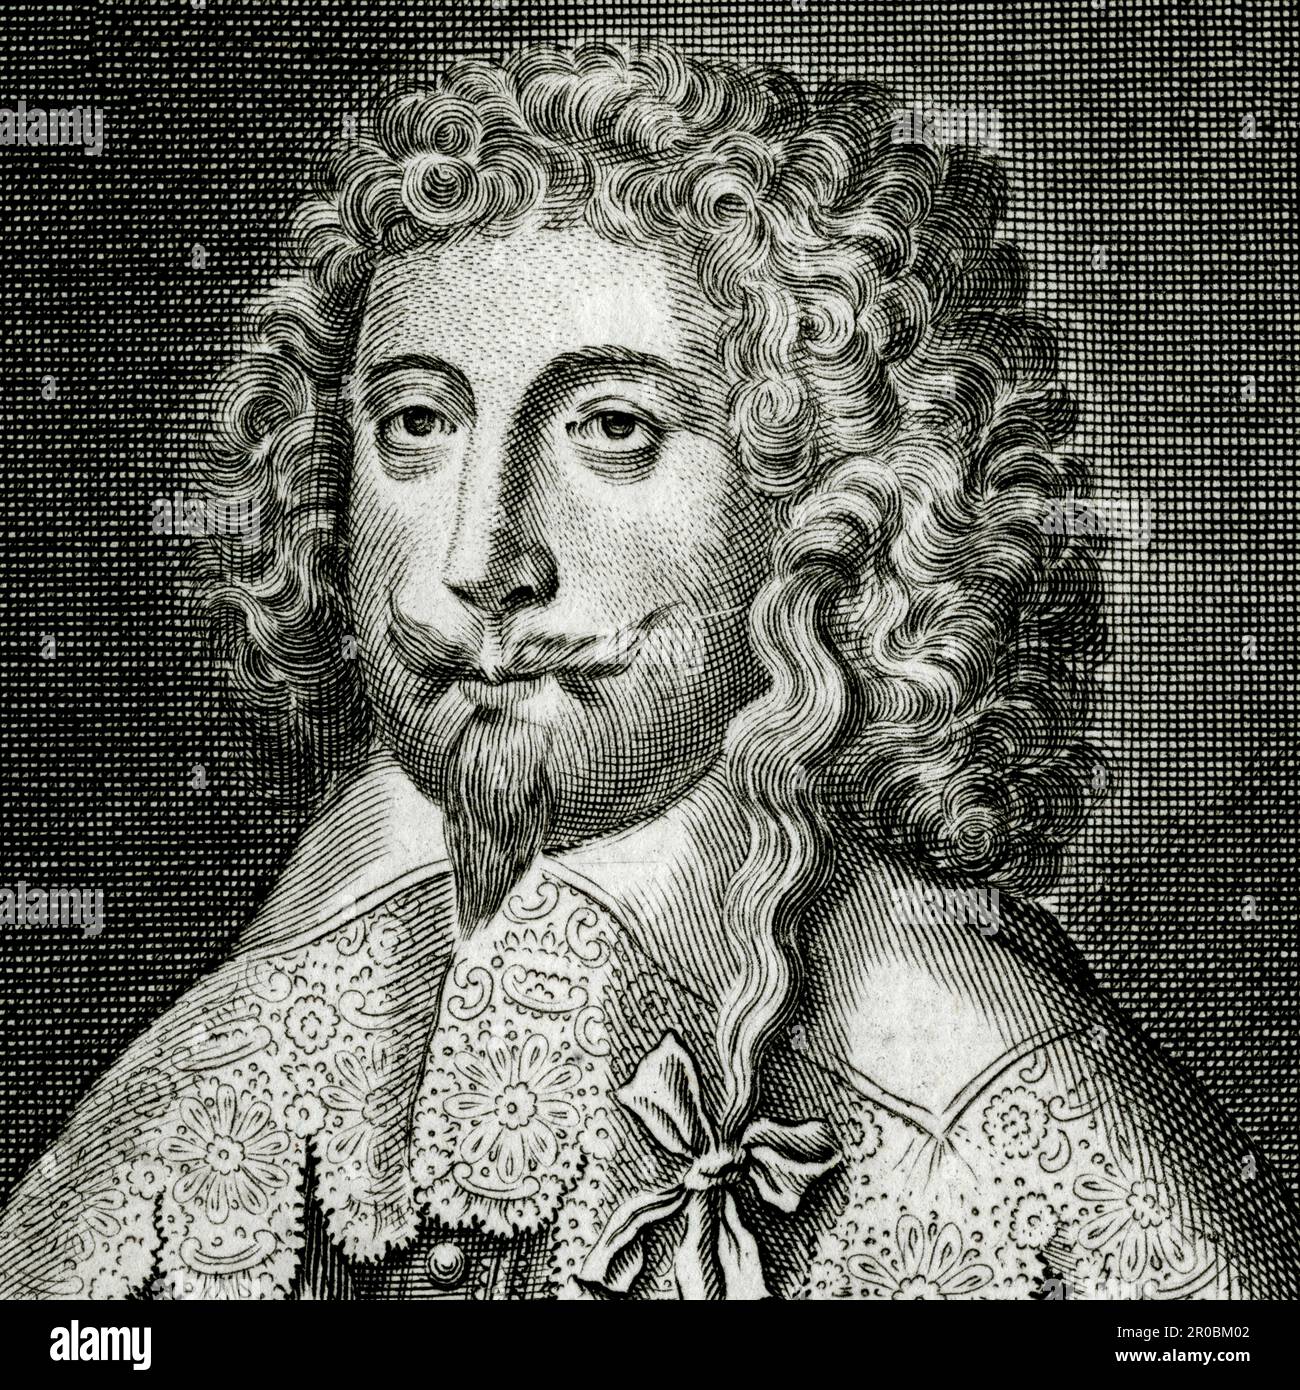 Edward Sackville (1591-1652), 4th Earl of Dorset, Lord Chamberlain to the French wife of King Charles I of England, Queen Henrietta Maria. After the trial and execution of King Charles I in 1649, Dorset was said never to have left his house in Fleet Street, London, until his own death. Square detail of engraving created in the 1700s by Michael Vandergucht (1660-1725), after a portrait by Sir Anthony Van Dyck. Stock Photo